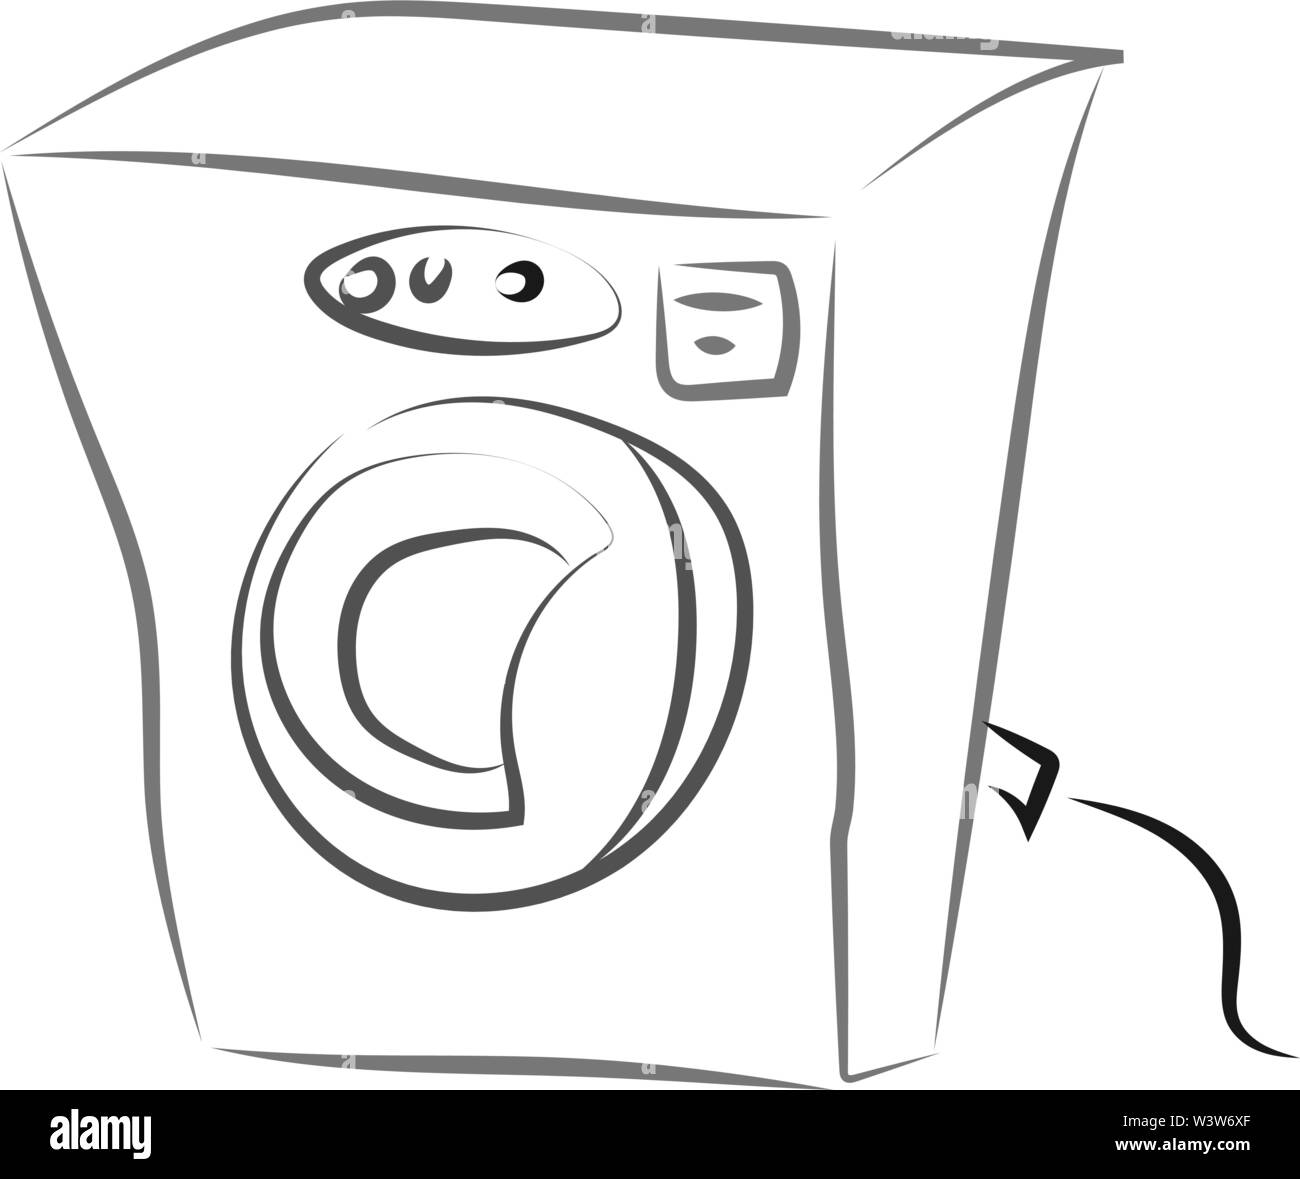 There's an environmental crisis in your washing machine